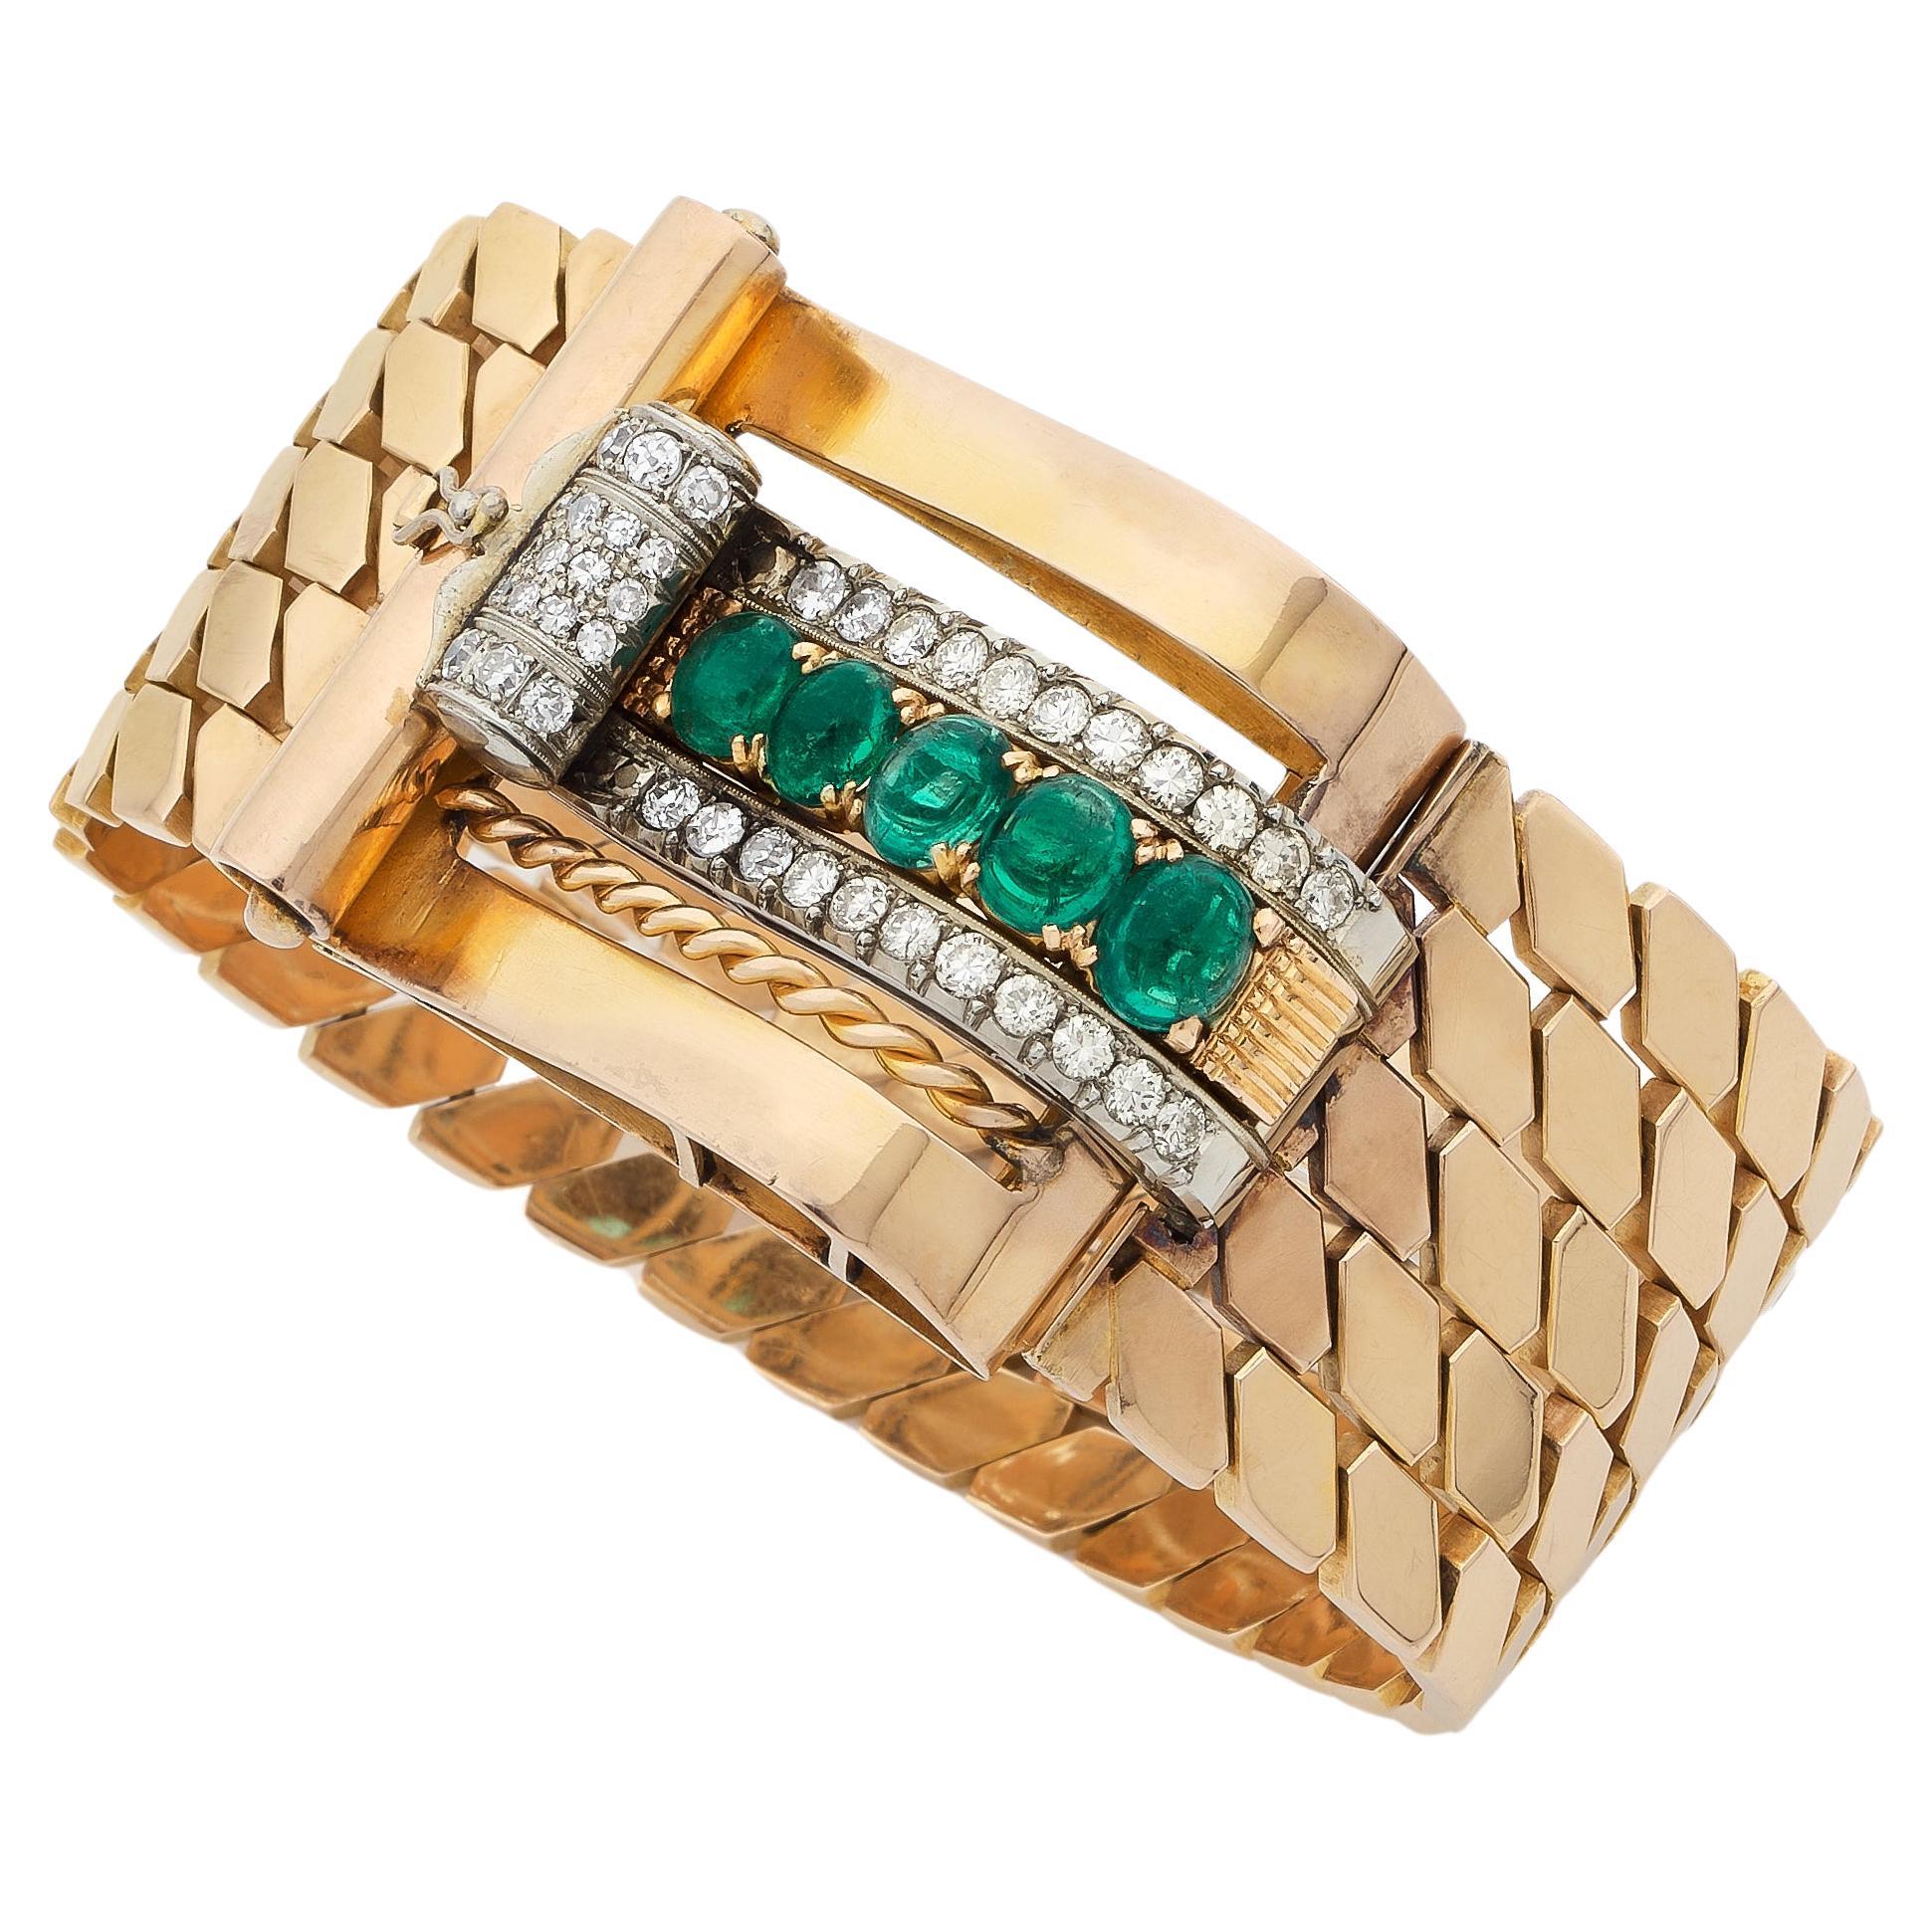 Spectacular Retro Bracelet with Emeralds and Diamonds For Sale